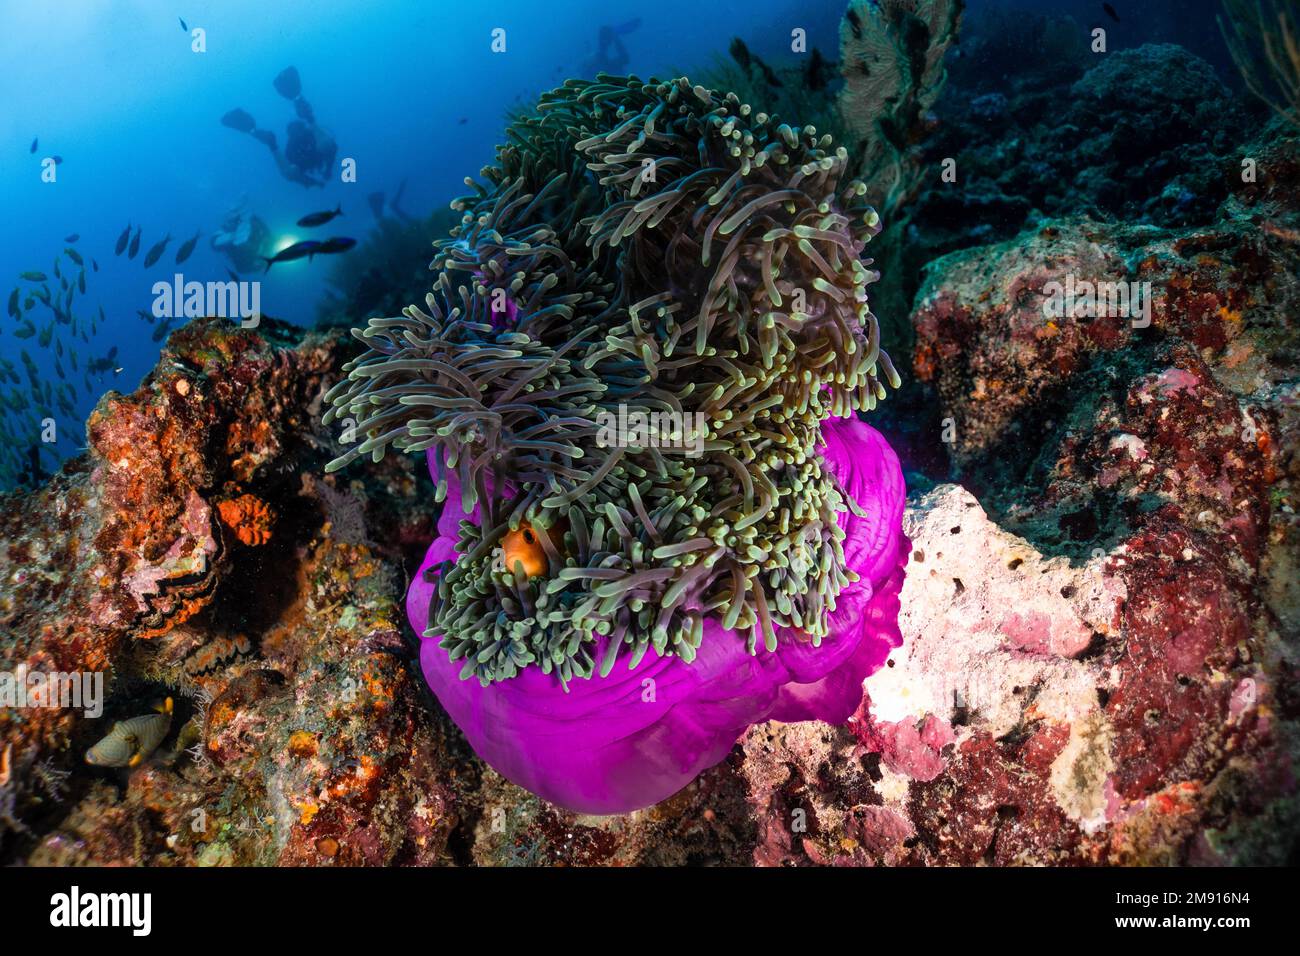 pink anemone and clownfish Nemo, diver and sun photo picture finding nemo underwater photography Stock Photo